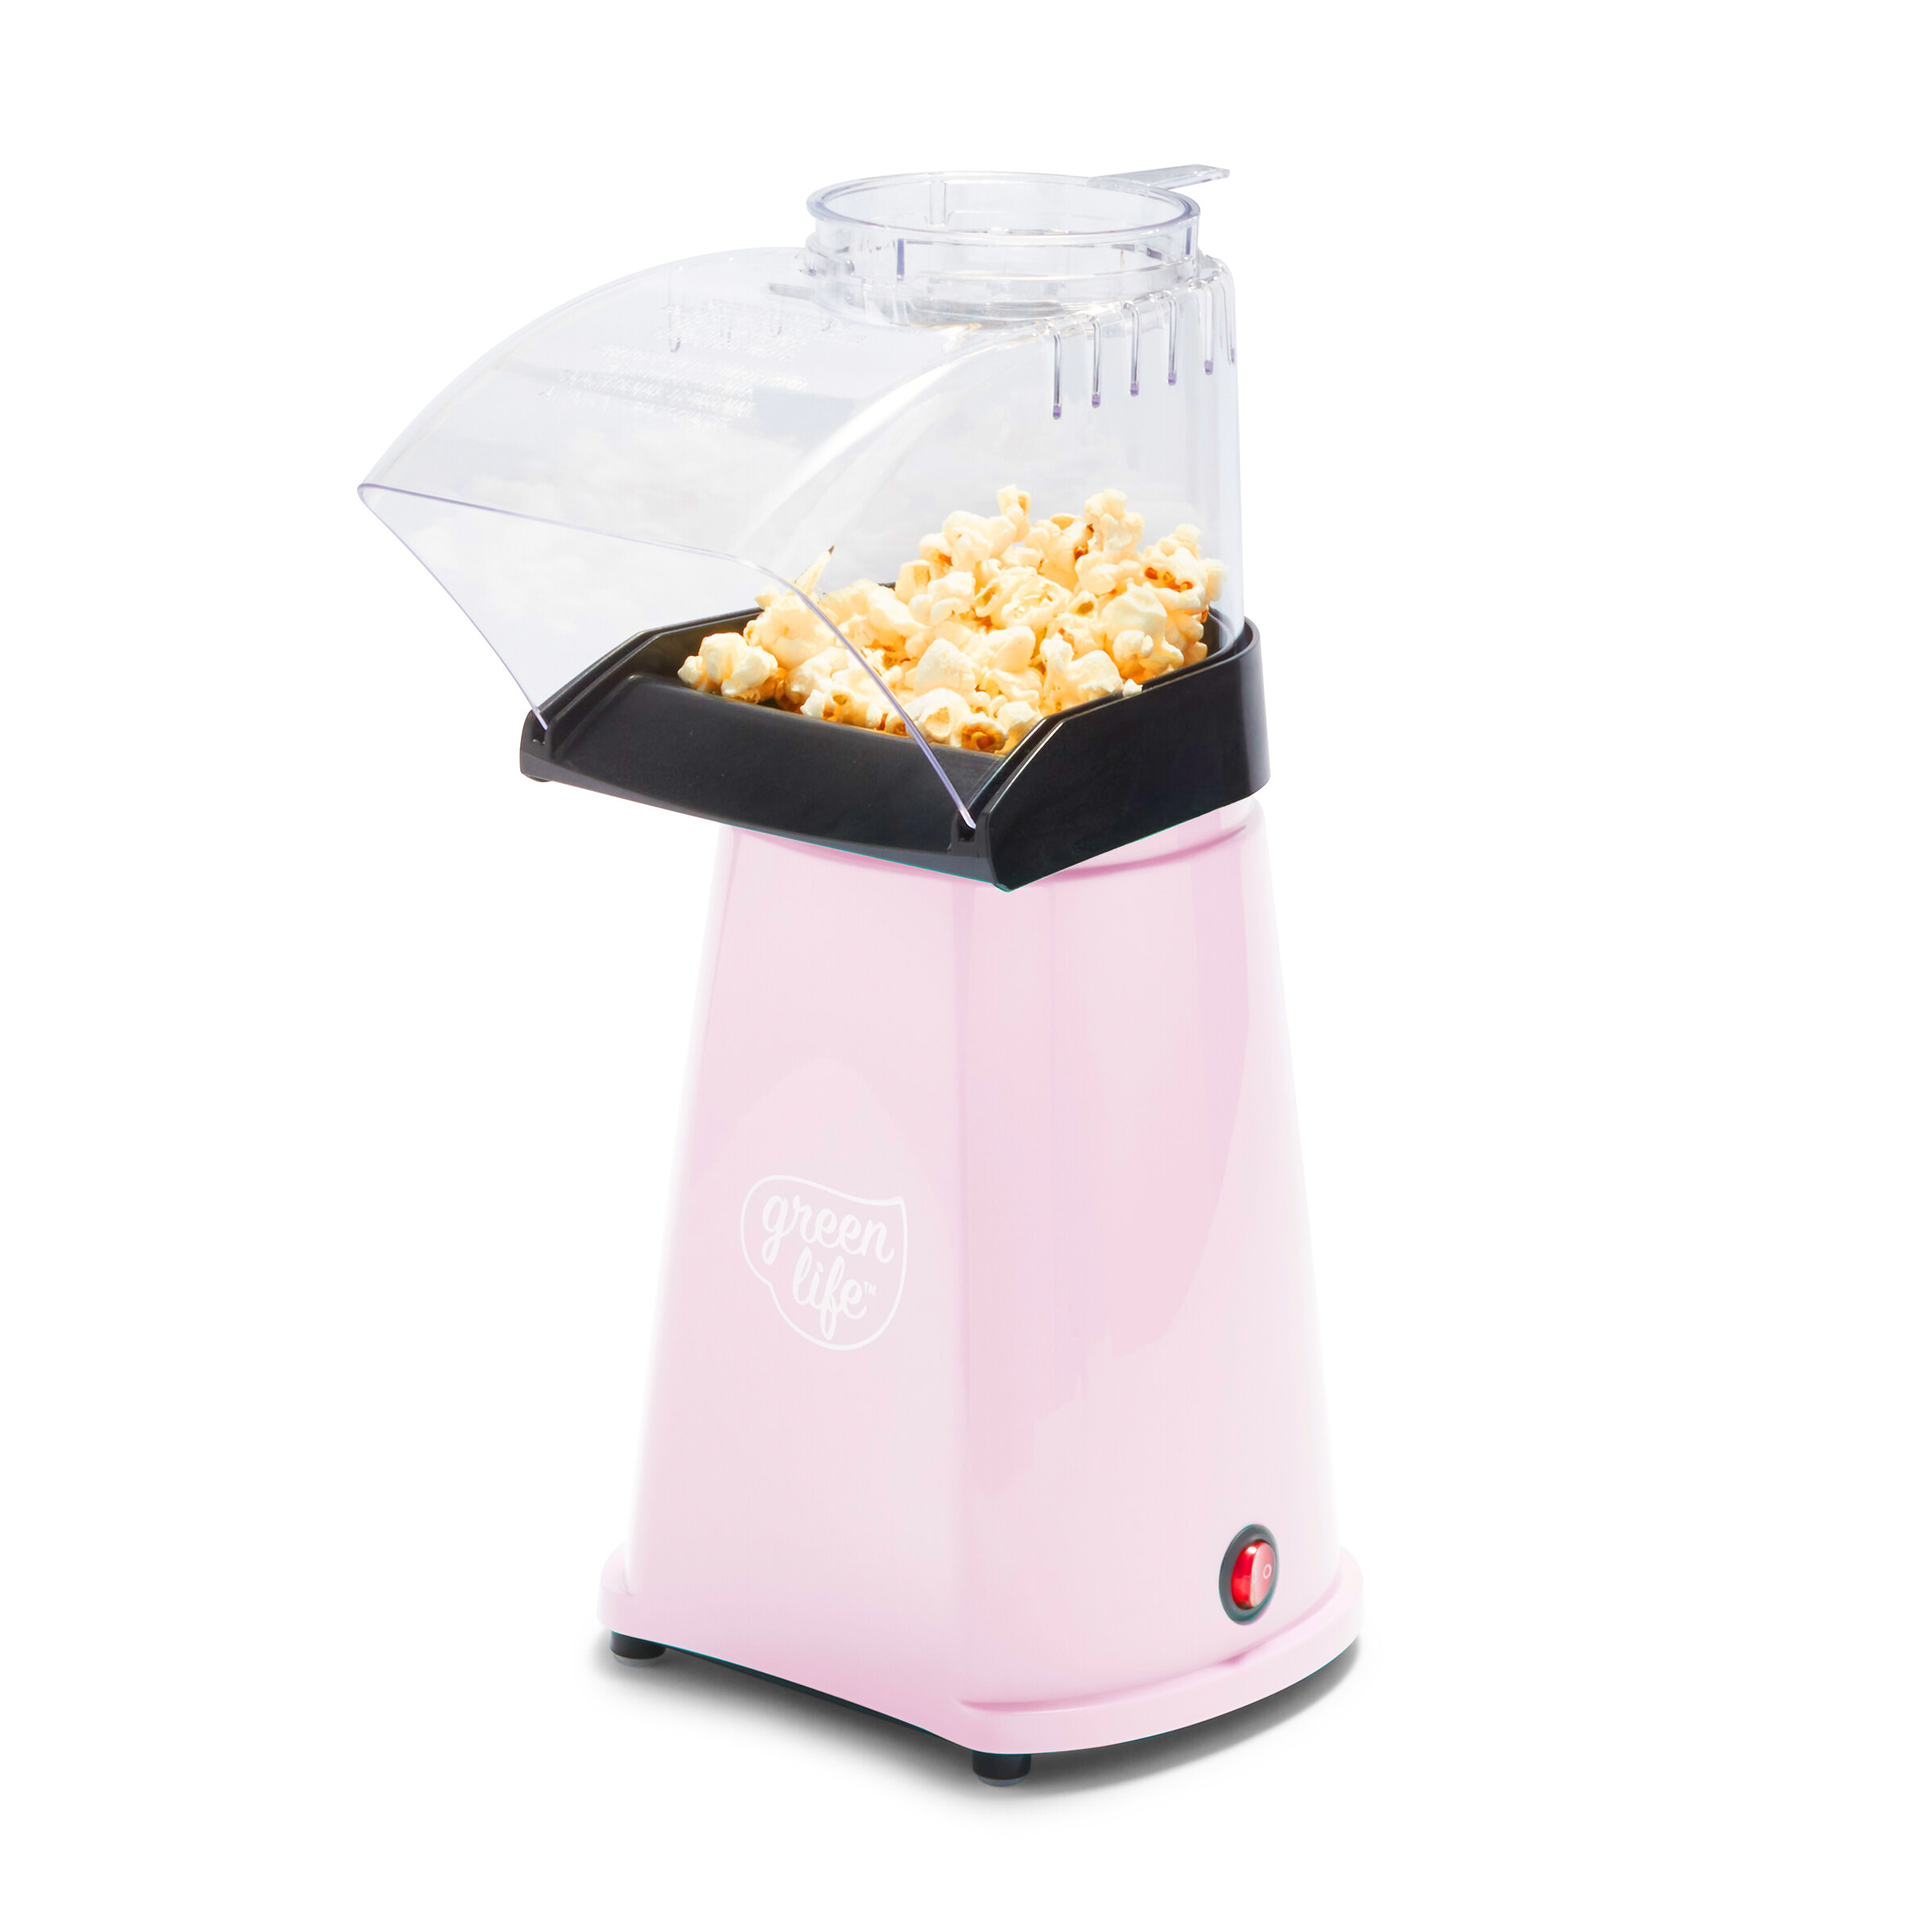  Hot Air Popcorn Popper Maker,Electric Popcorn Machine Maker  Popper With Measuring Spoon, Quick Popcorn, Oil Free, Good For Watching  Movies,Party, Holiday Gift (Color : White): Home & Kitchen